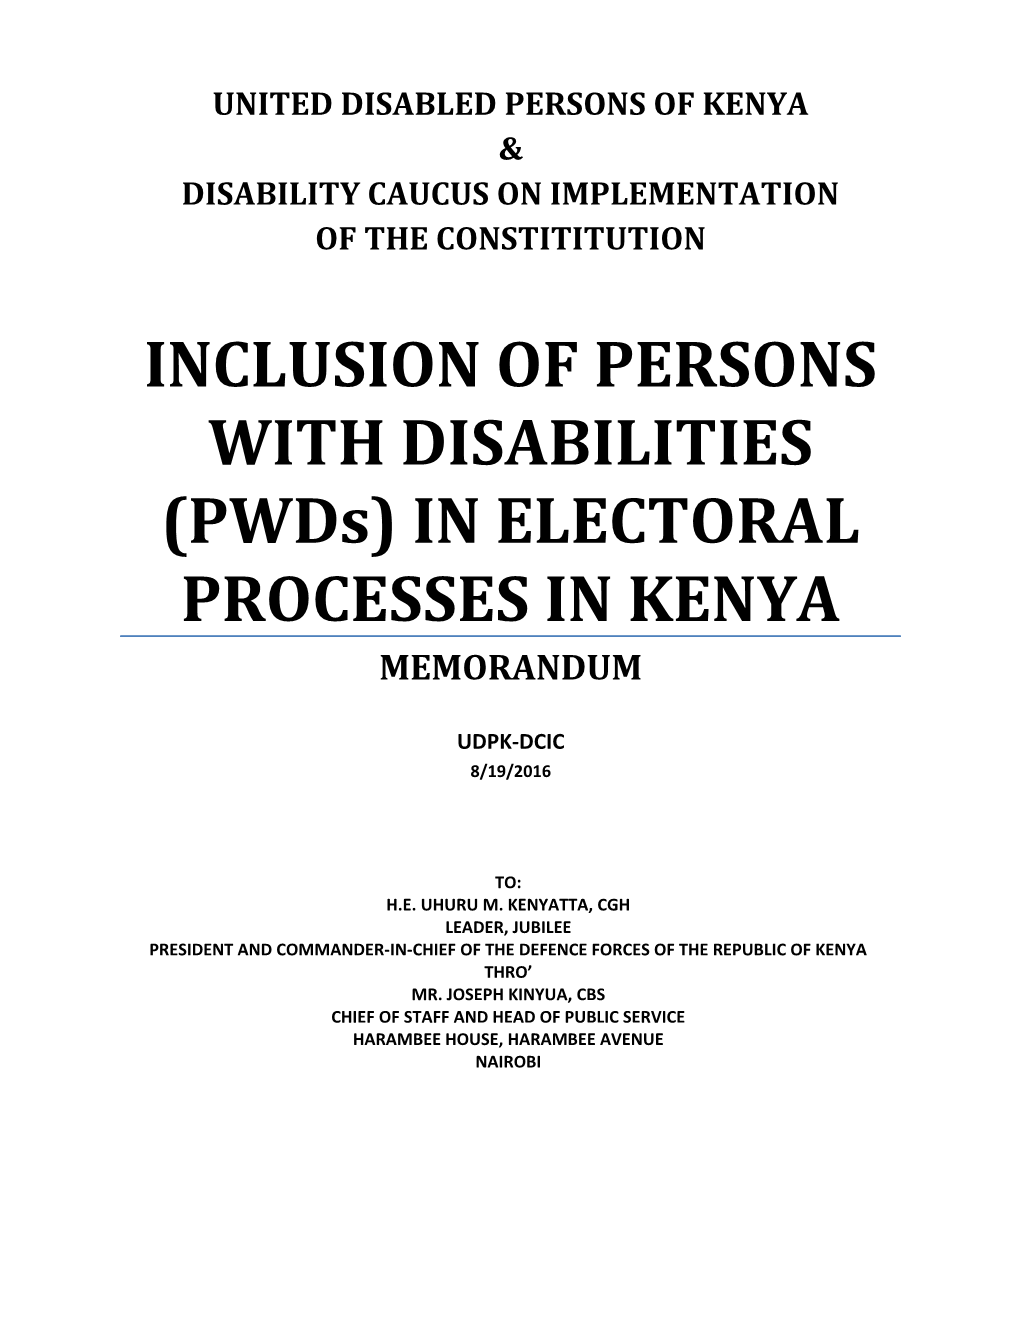 INCLUSION of PERSONS with DISABILITIES (Pwds) in ELECTORAL PROCESSES in KENYA